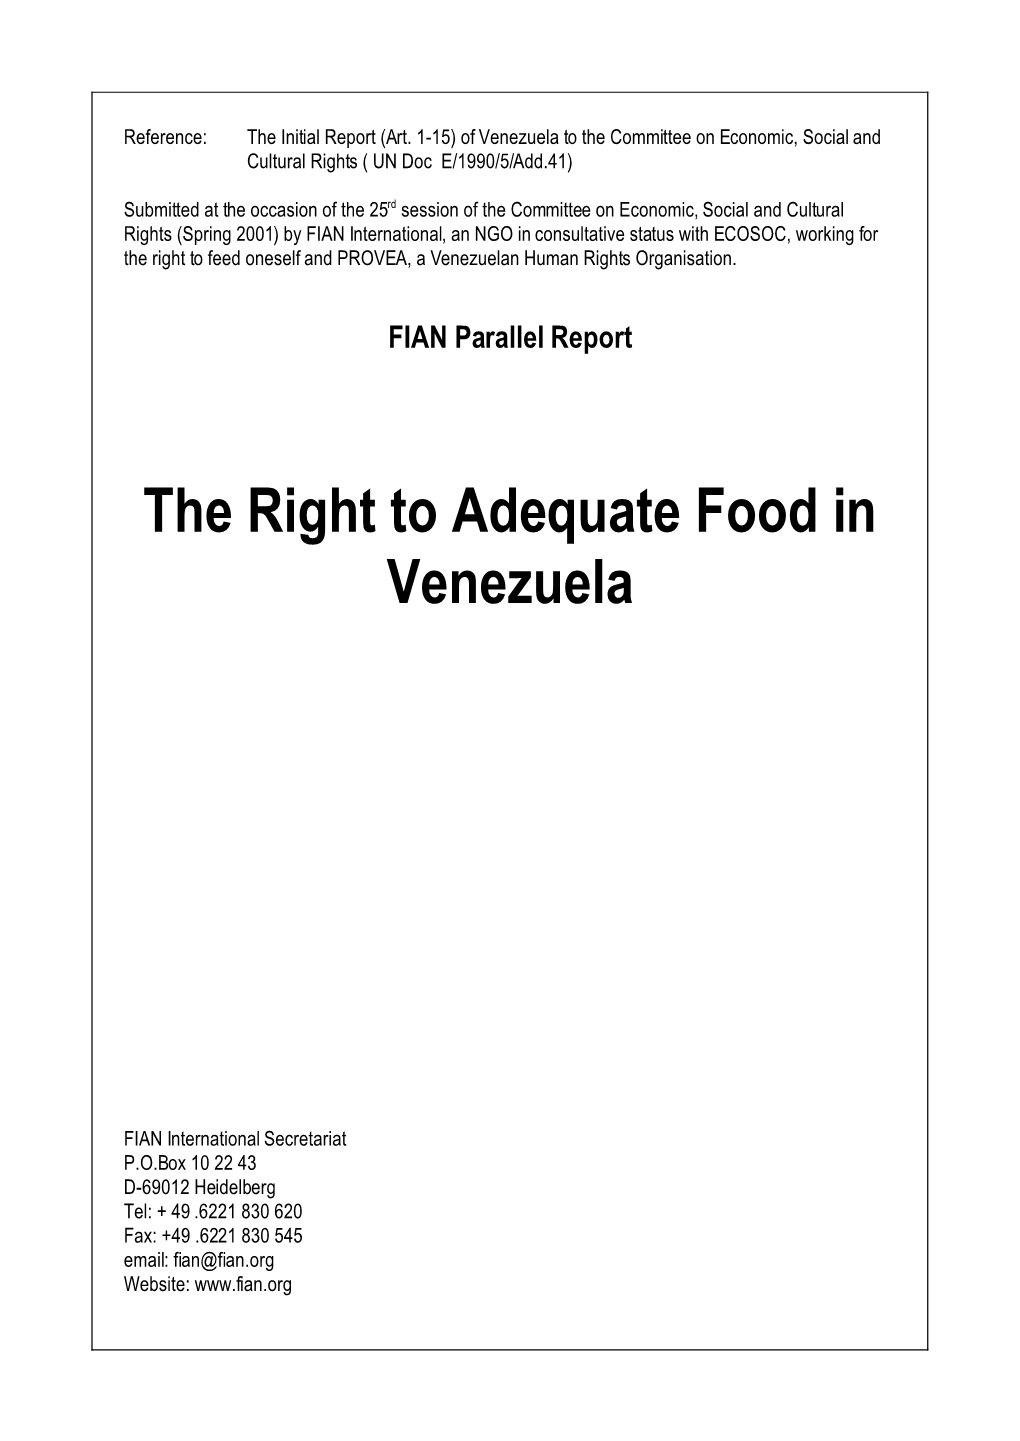 The Right to Adequate Food in Venezuela